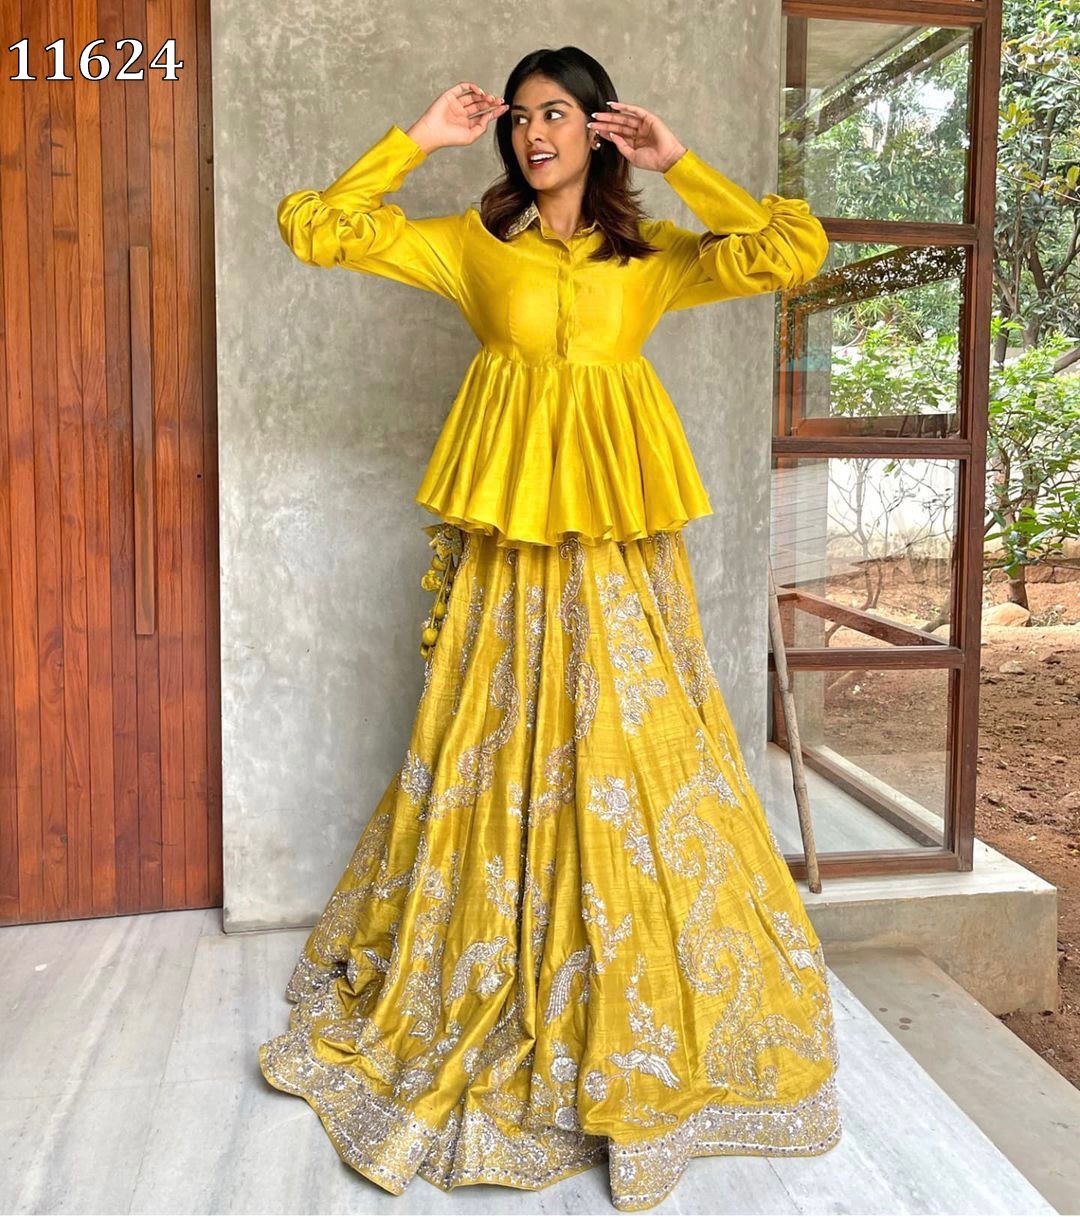 Haldi Gown in Georgette With Digital Print Bollywood Haldi Ceremony Gown |  Combination dresses, Floral print gowns, Printed gowns